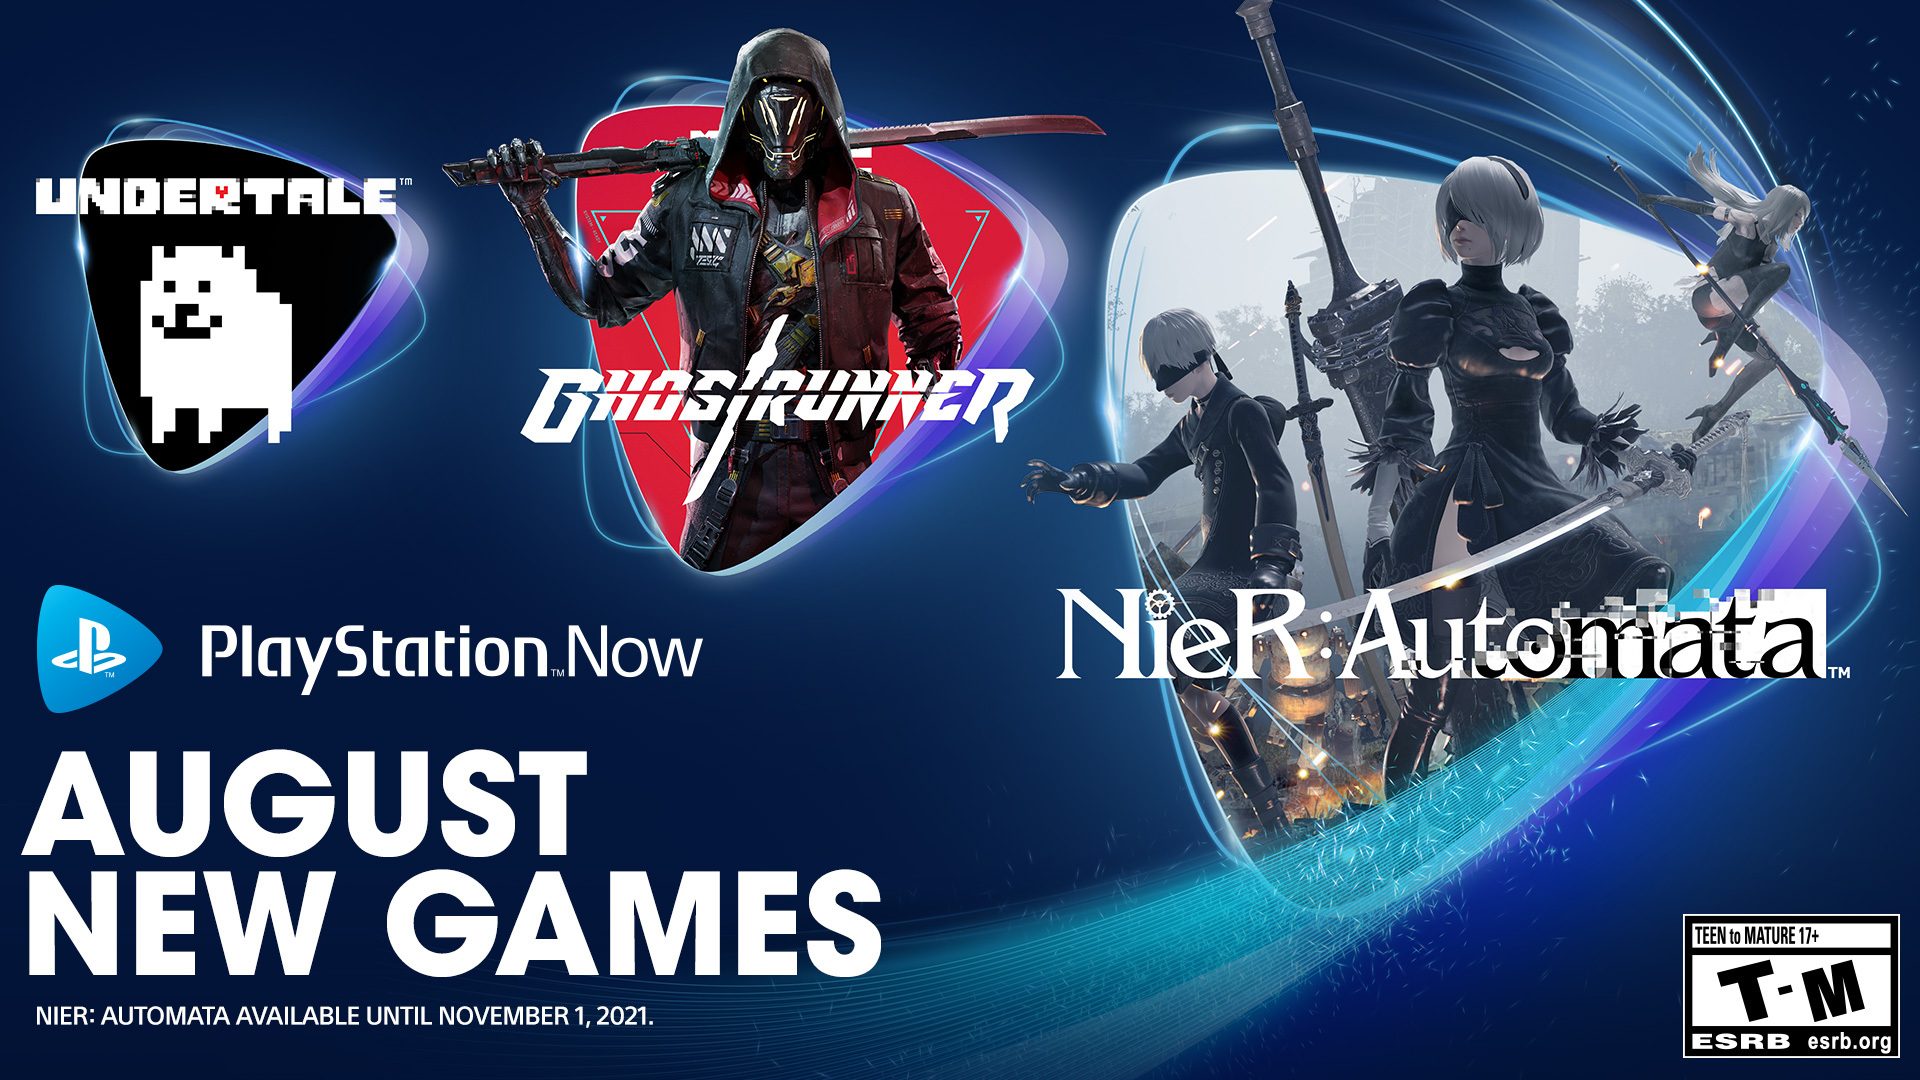 PlayStation Now games for August Nier Automata, Ghostrunner